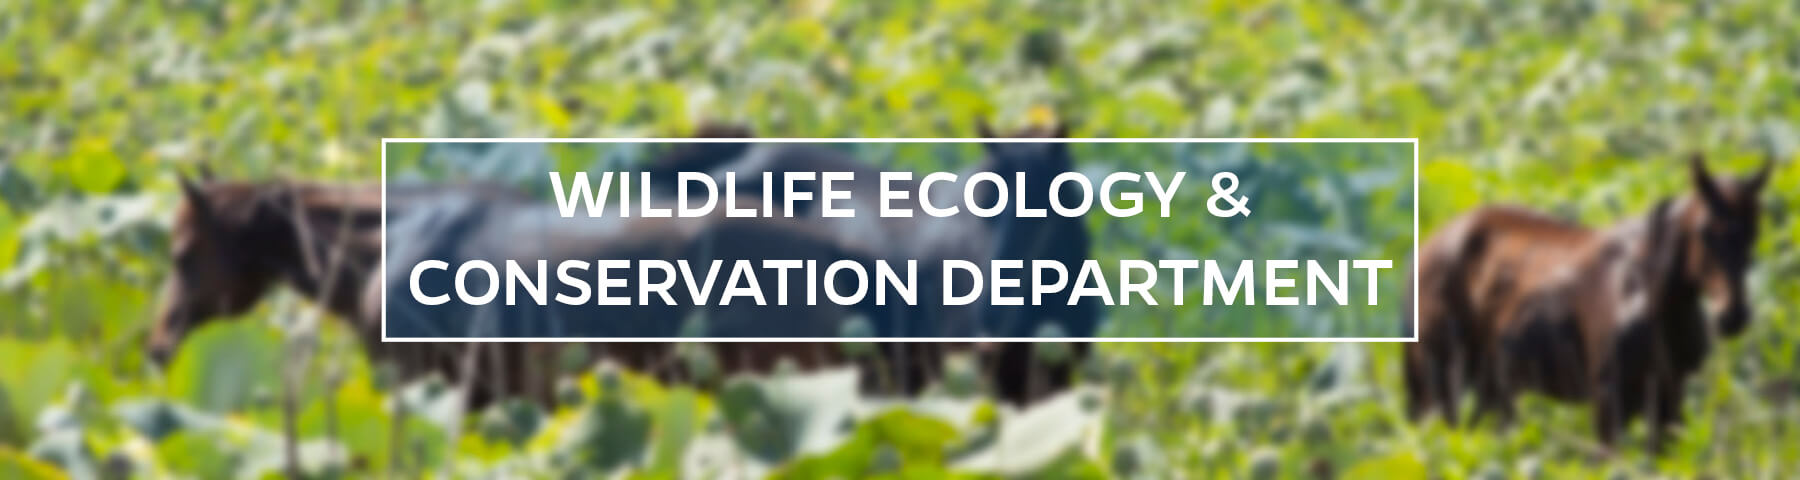  UF/IFAS Wildlife Ecology and Conservation Department